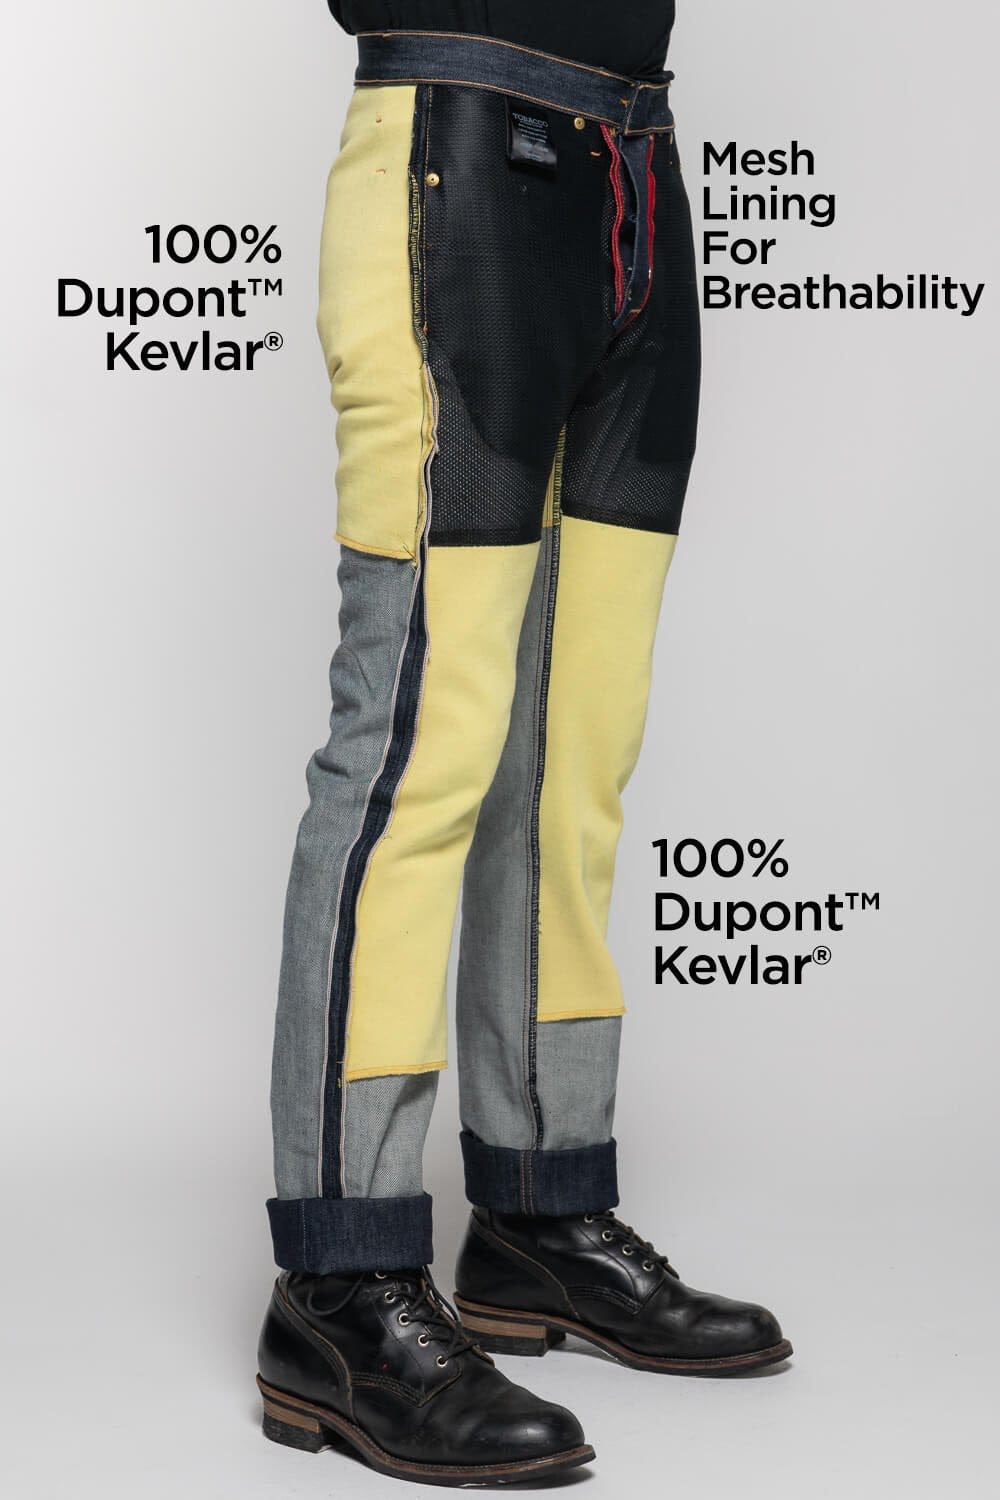 sukker teenagere Dem Riot Skinny Fit Protective Riding Jeans. Feat. Protective DuPont™ Kevlar®  Lining. Jet Black Prewashed Denim has 2% Stretch. Made Proudly in the USA.  - Tobacco Motorwear